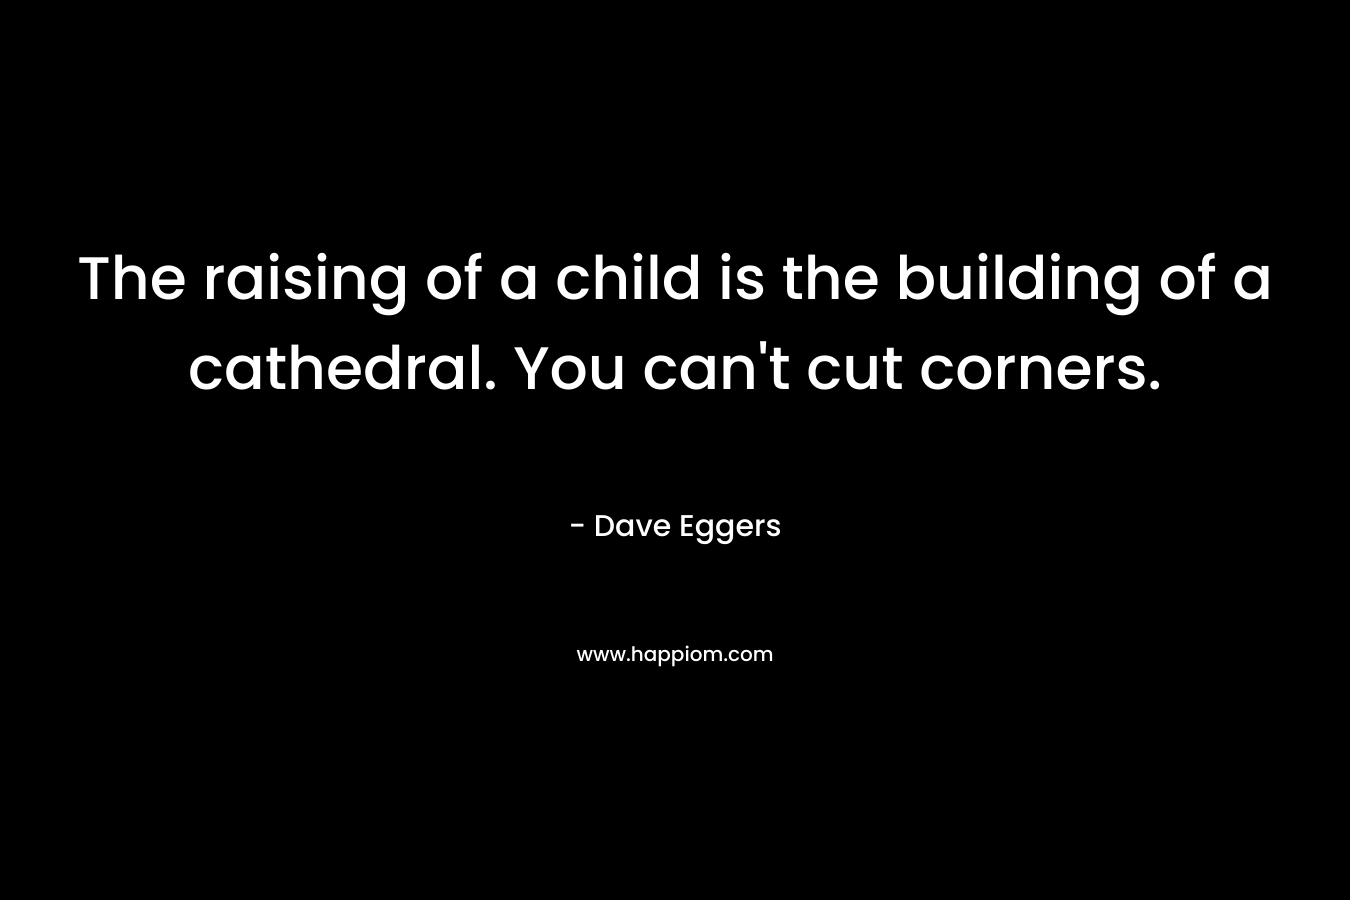 The raising of a child is the building of a cathedral. You can’t cut corners. – Dave Eggers